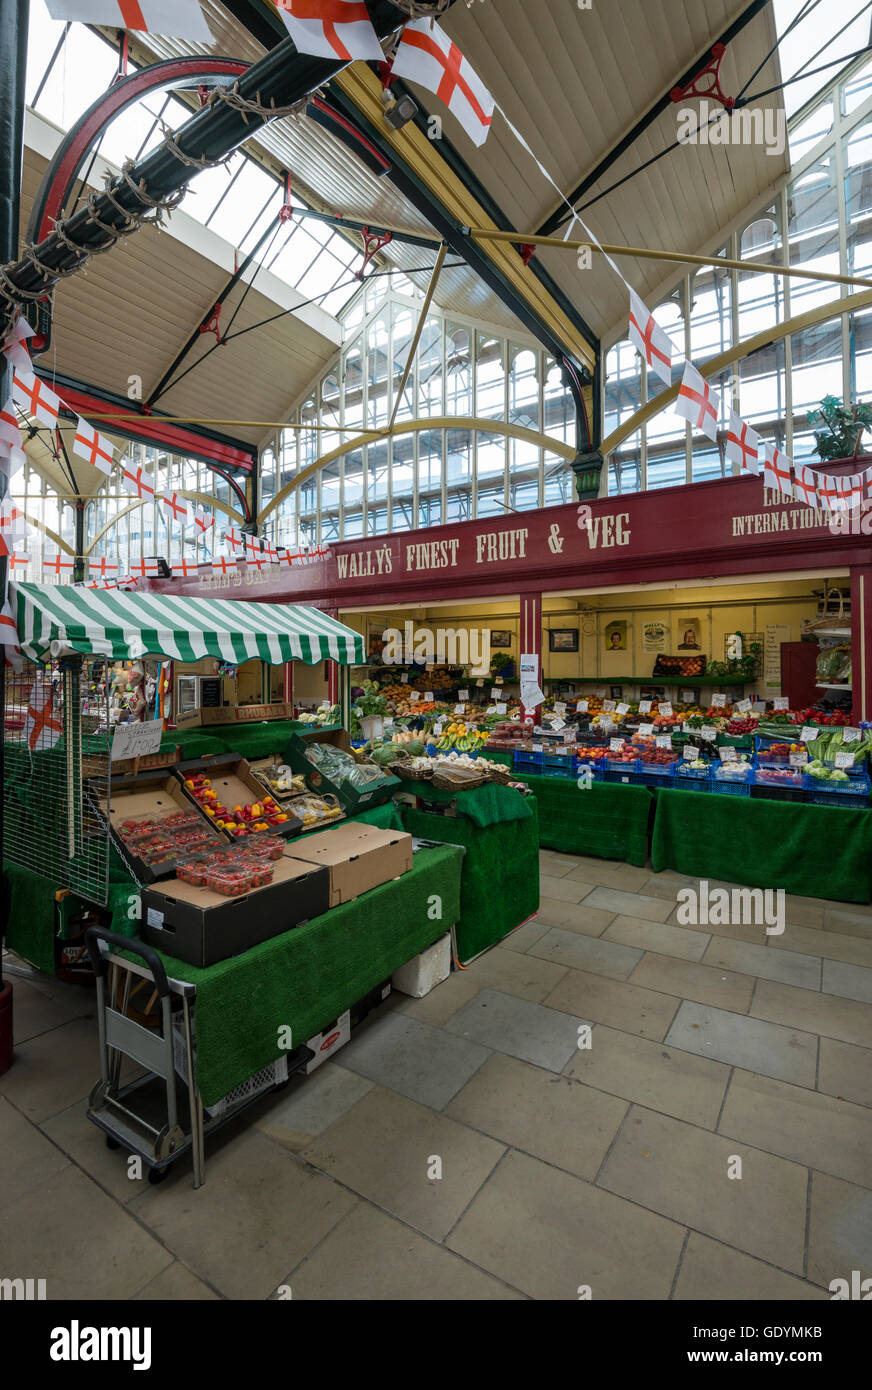 The indoor market in the town of Stockport in northwest England. Stock Photo